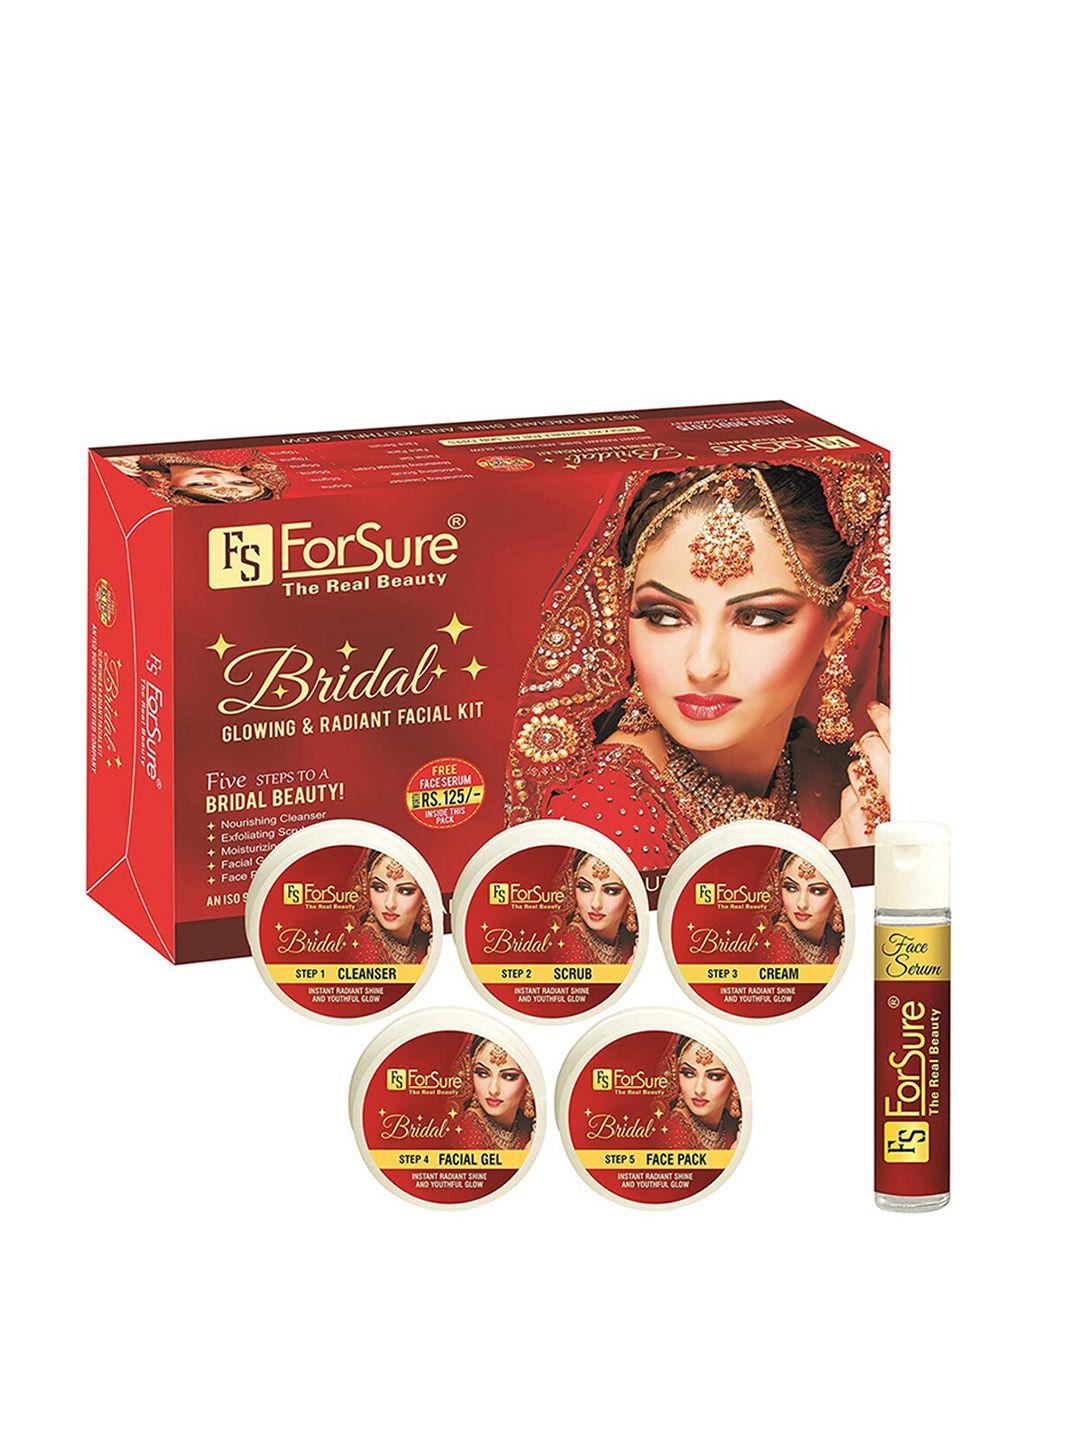 forsure bridal glowing & radiant 5-step facial kit with free face serum